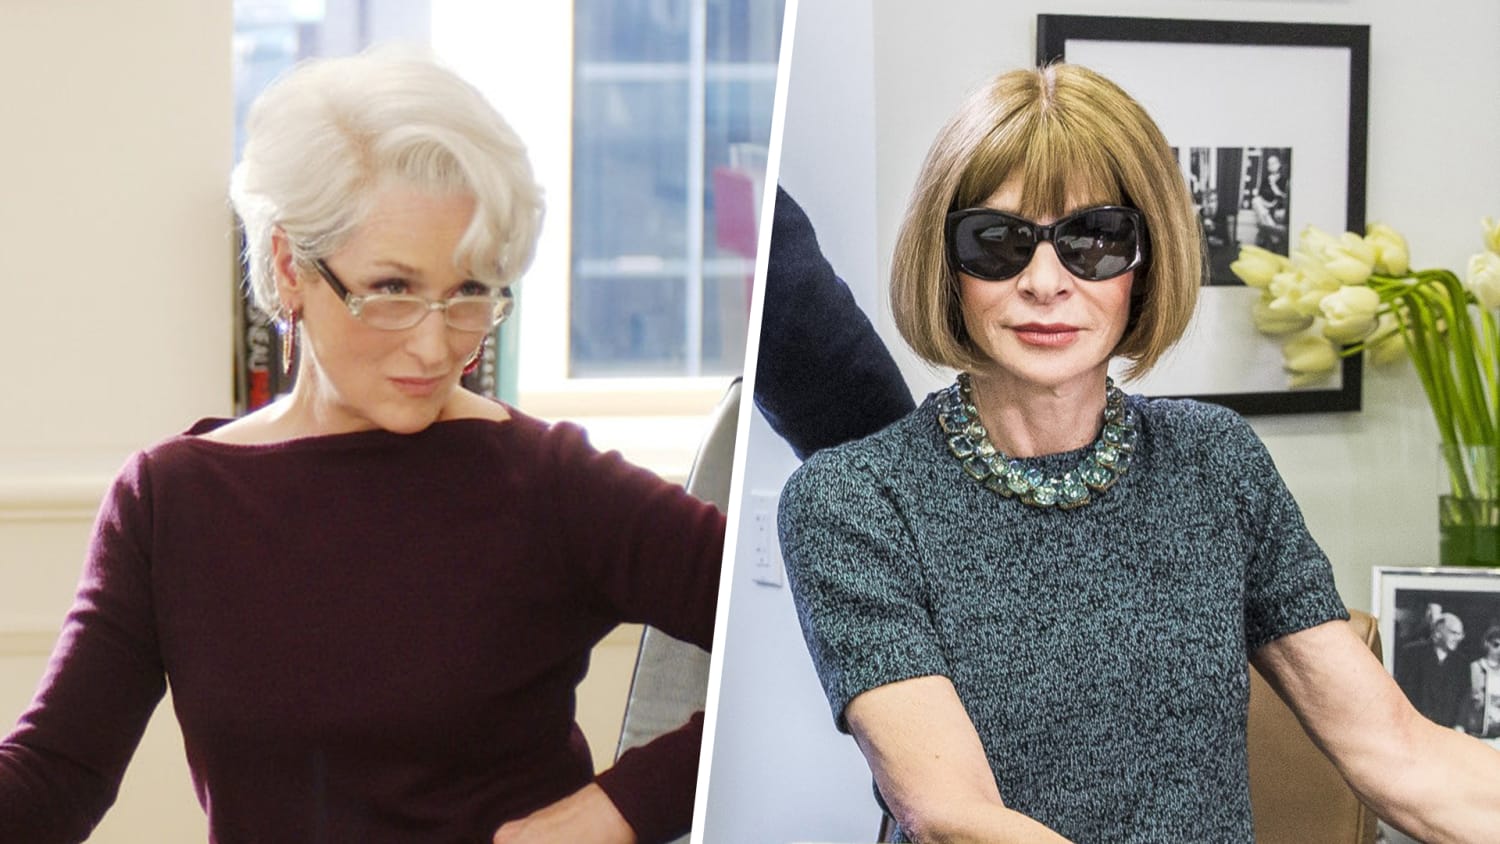 Meryl Streep channels 'Devil Wears Prada' character for meeting with Anna  Wintour